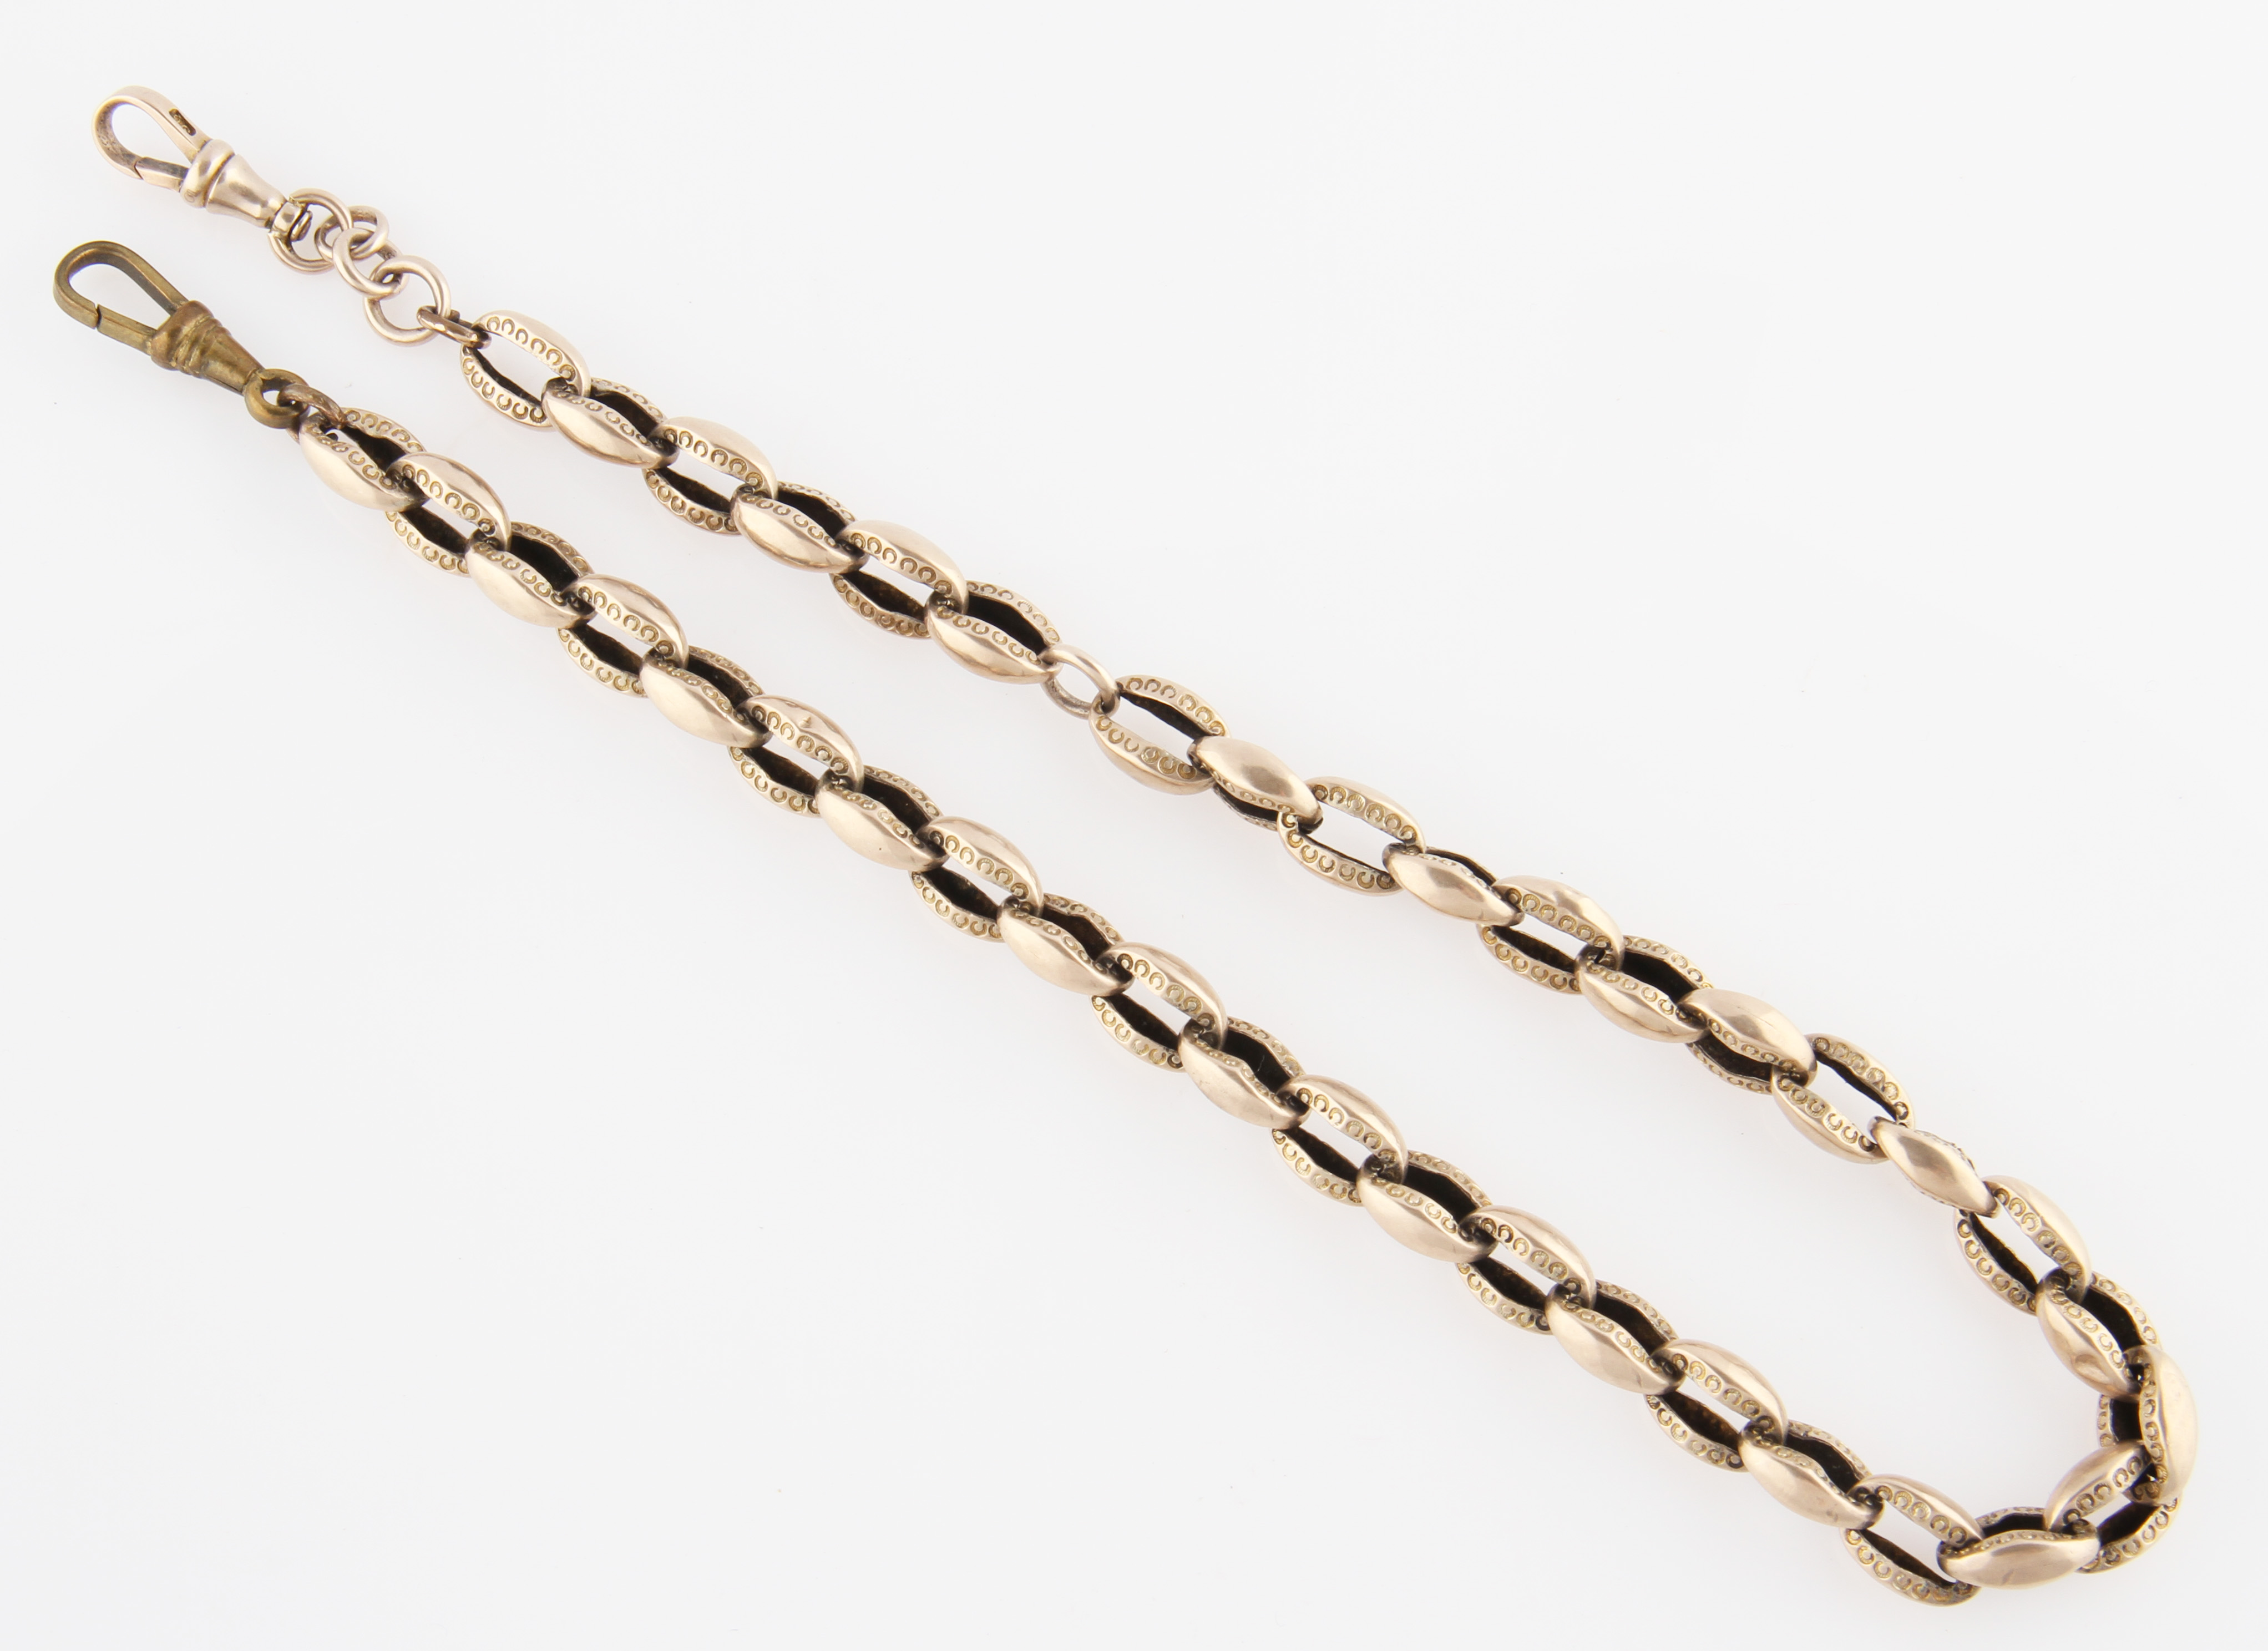 A belcher link watch chain, each link featuring repeat crescent design, with lobster clasps.